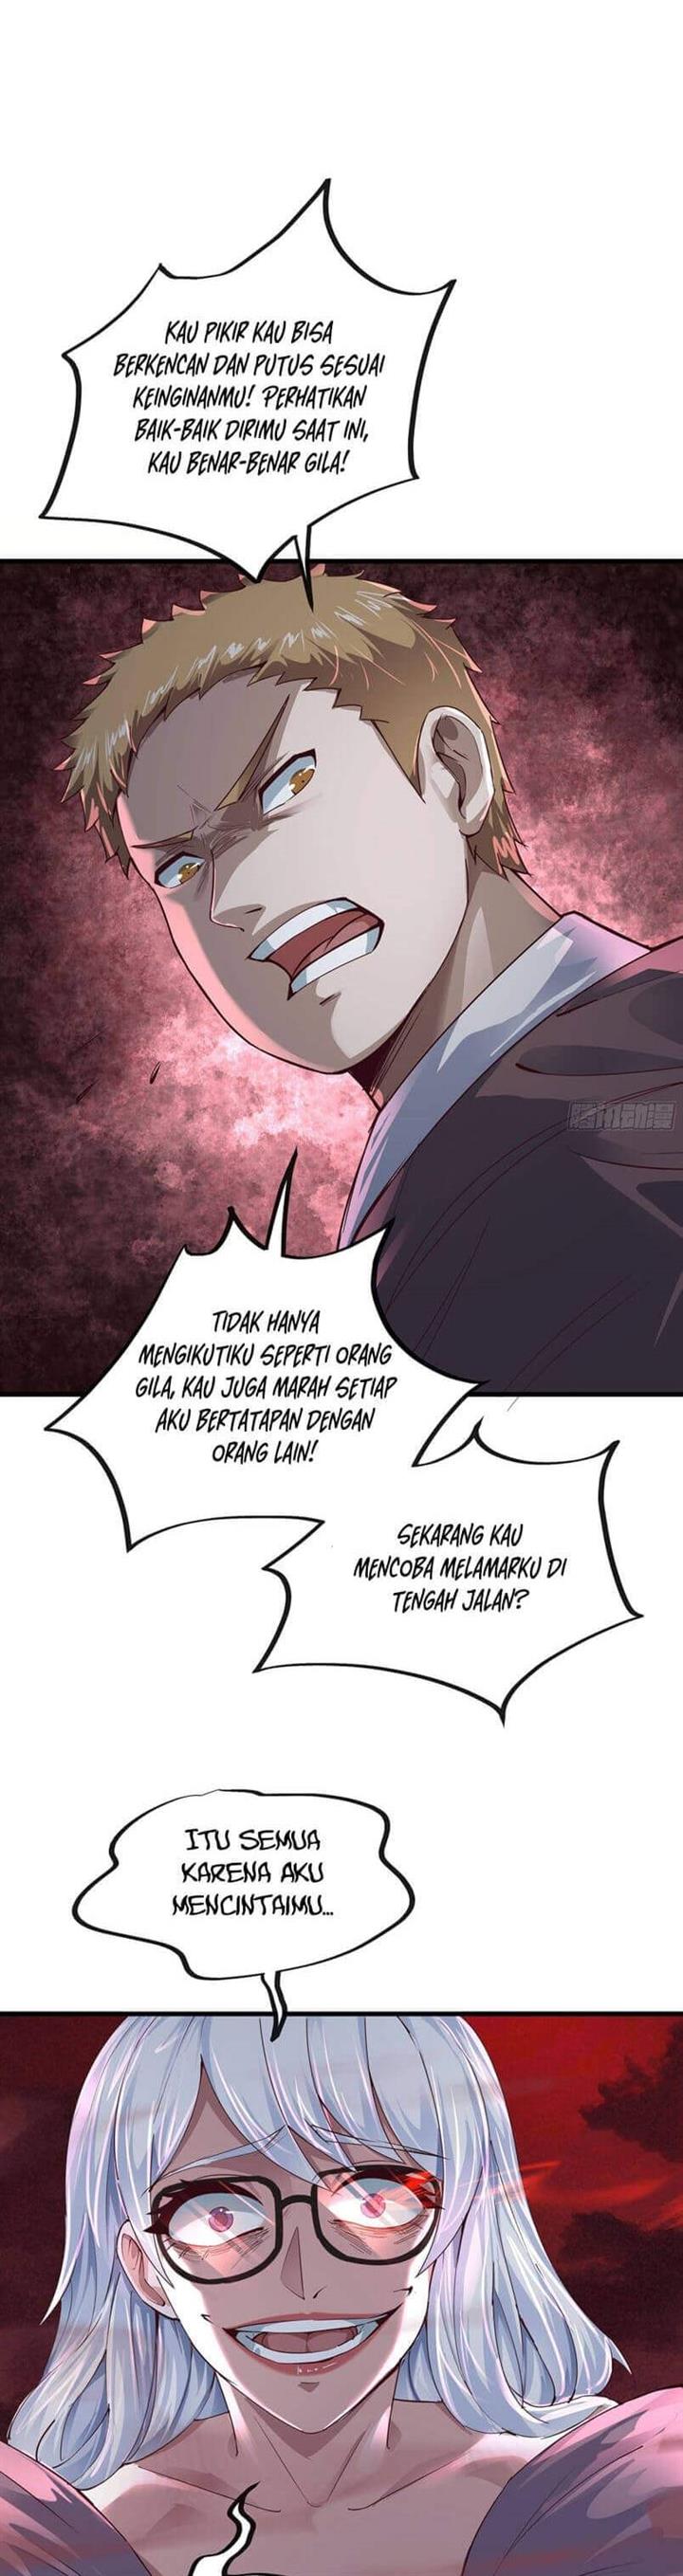 Since The Red Moon Appeared Chapter 37